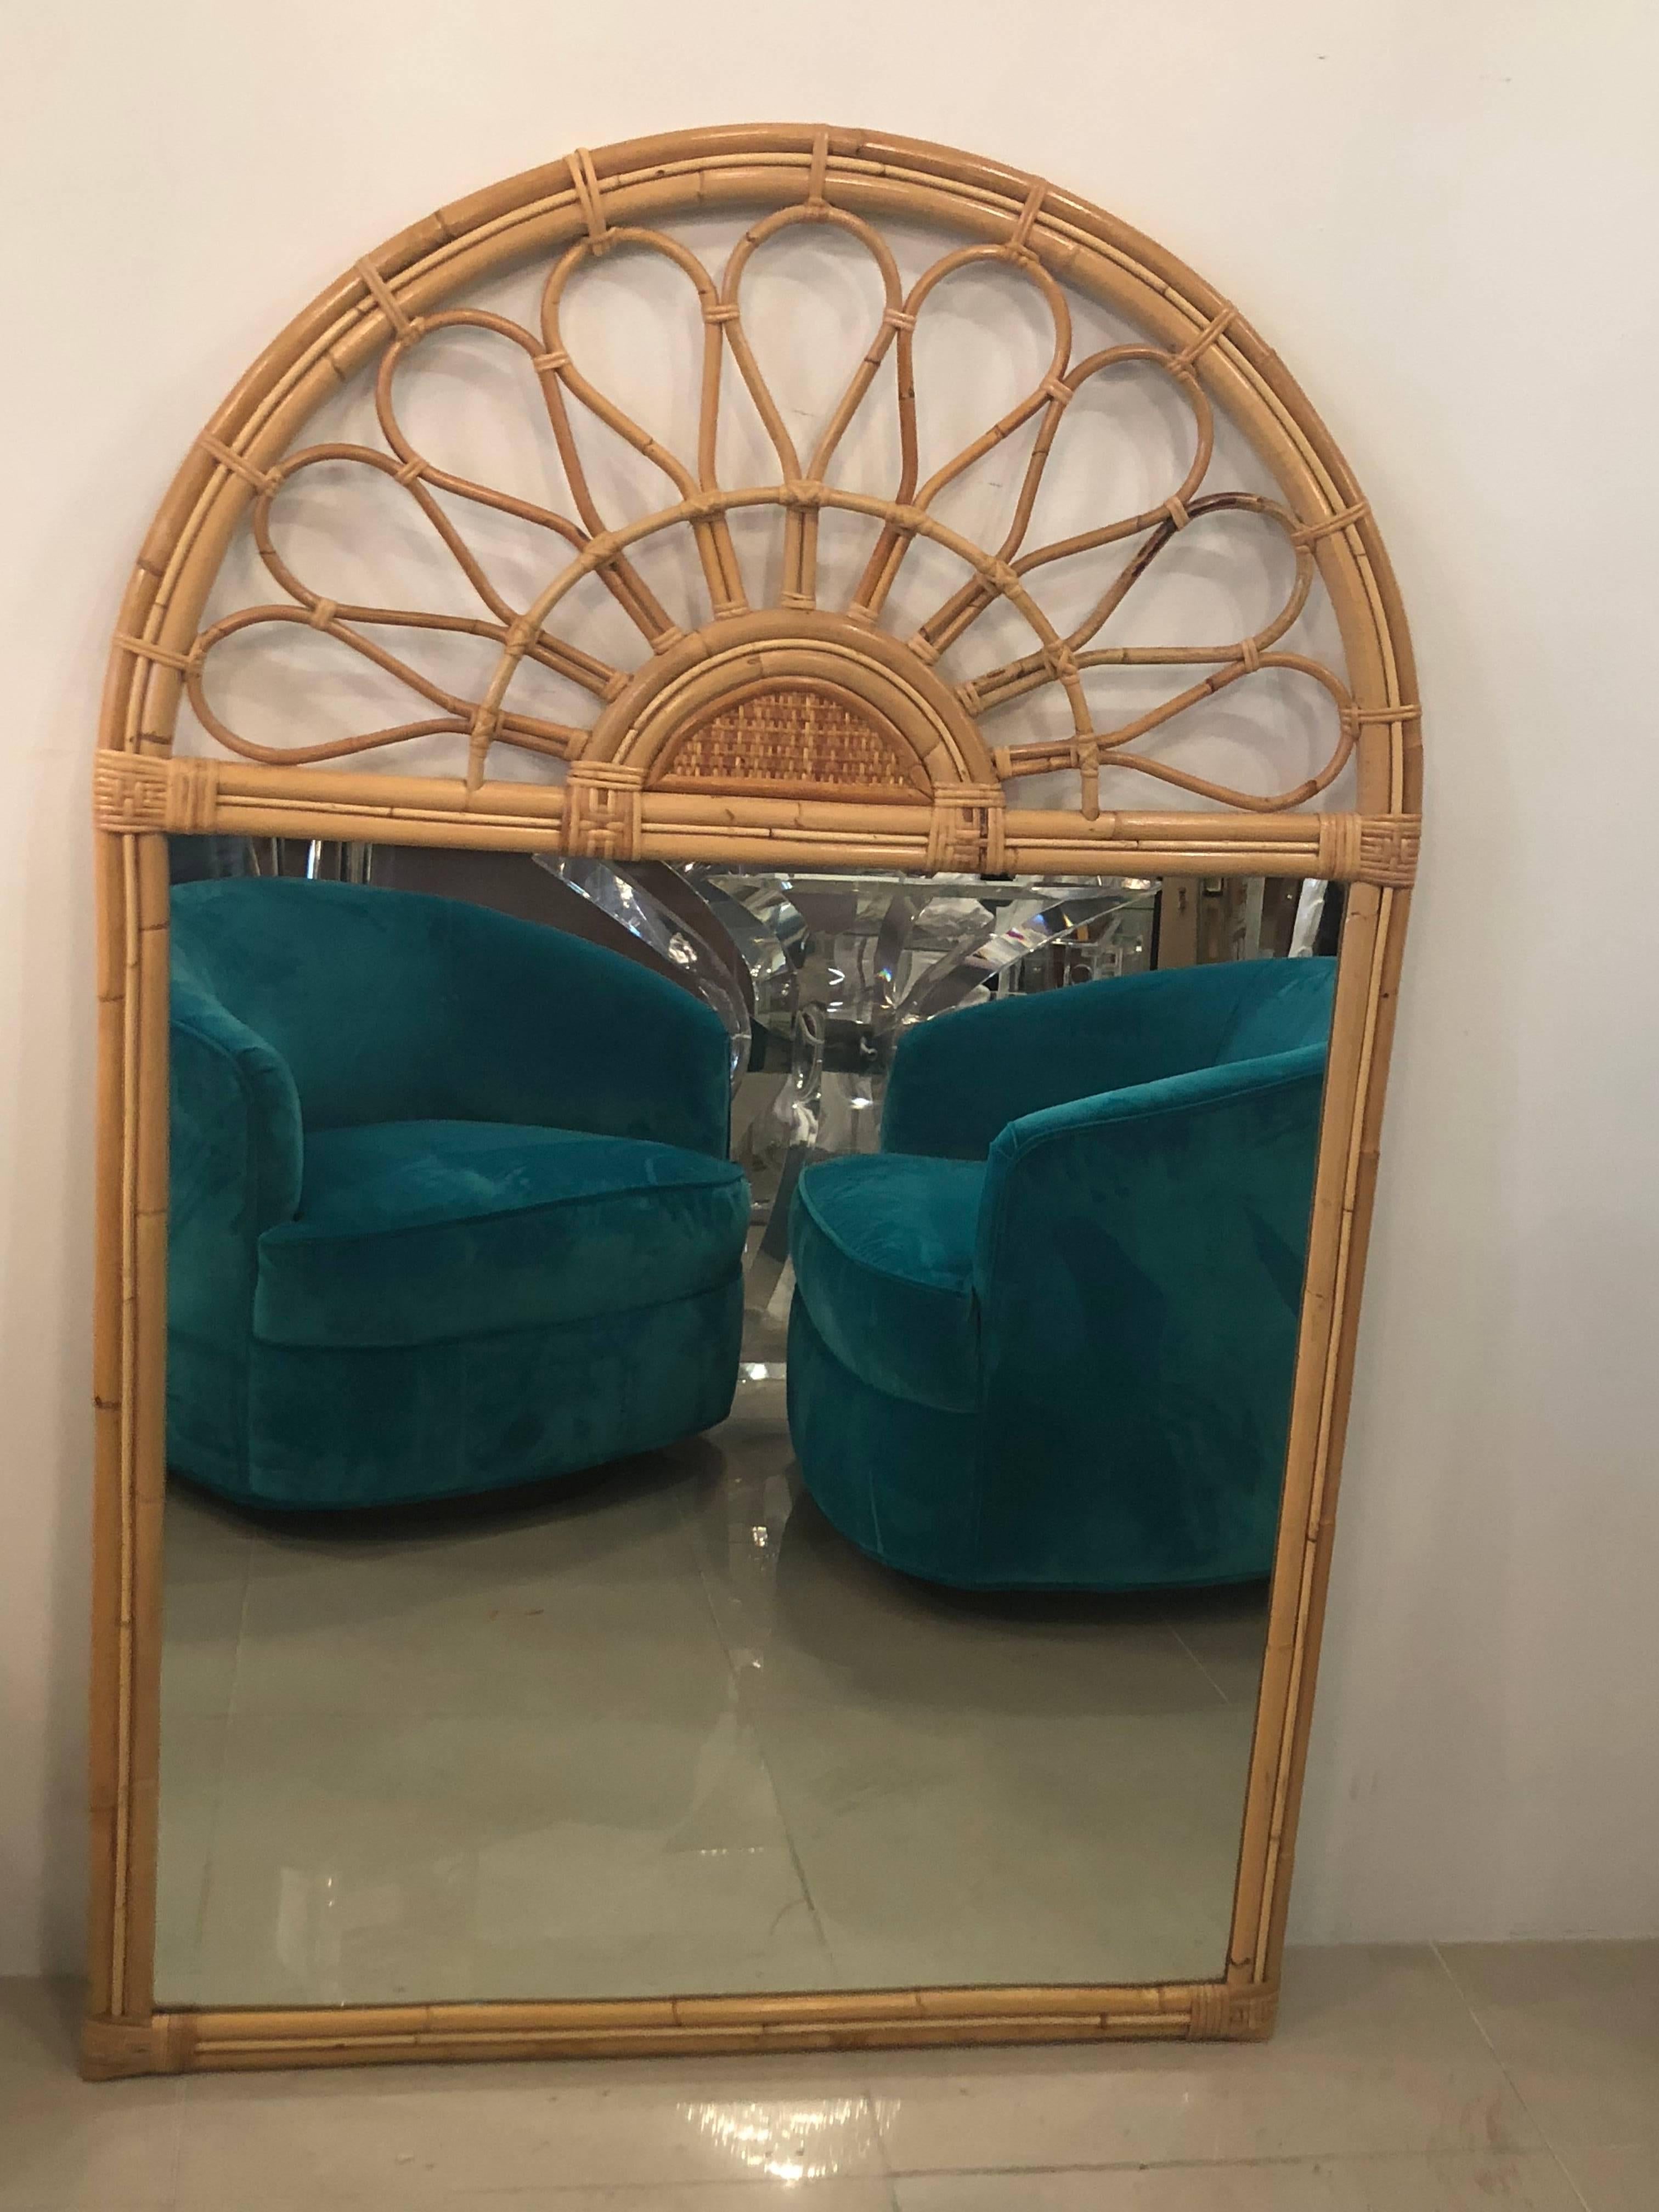 Vintage tropical bamboo rattan arched wall mirror. Ready to hang on your wall. Original natural finish with no flaws.
 